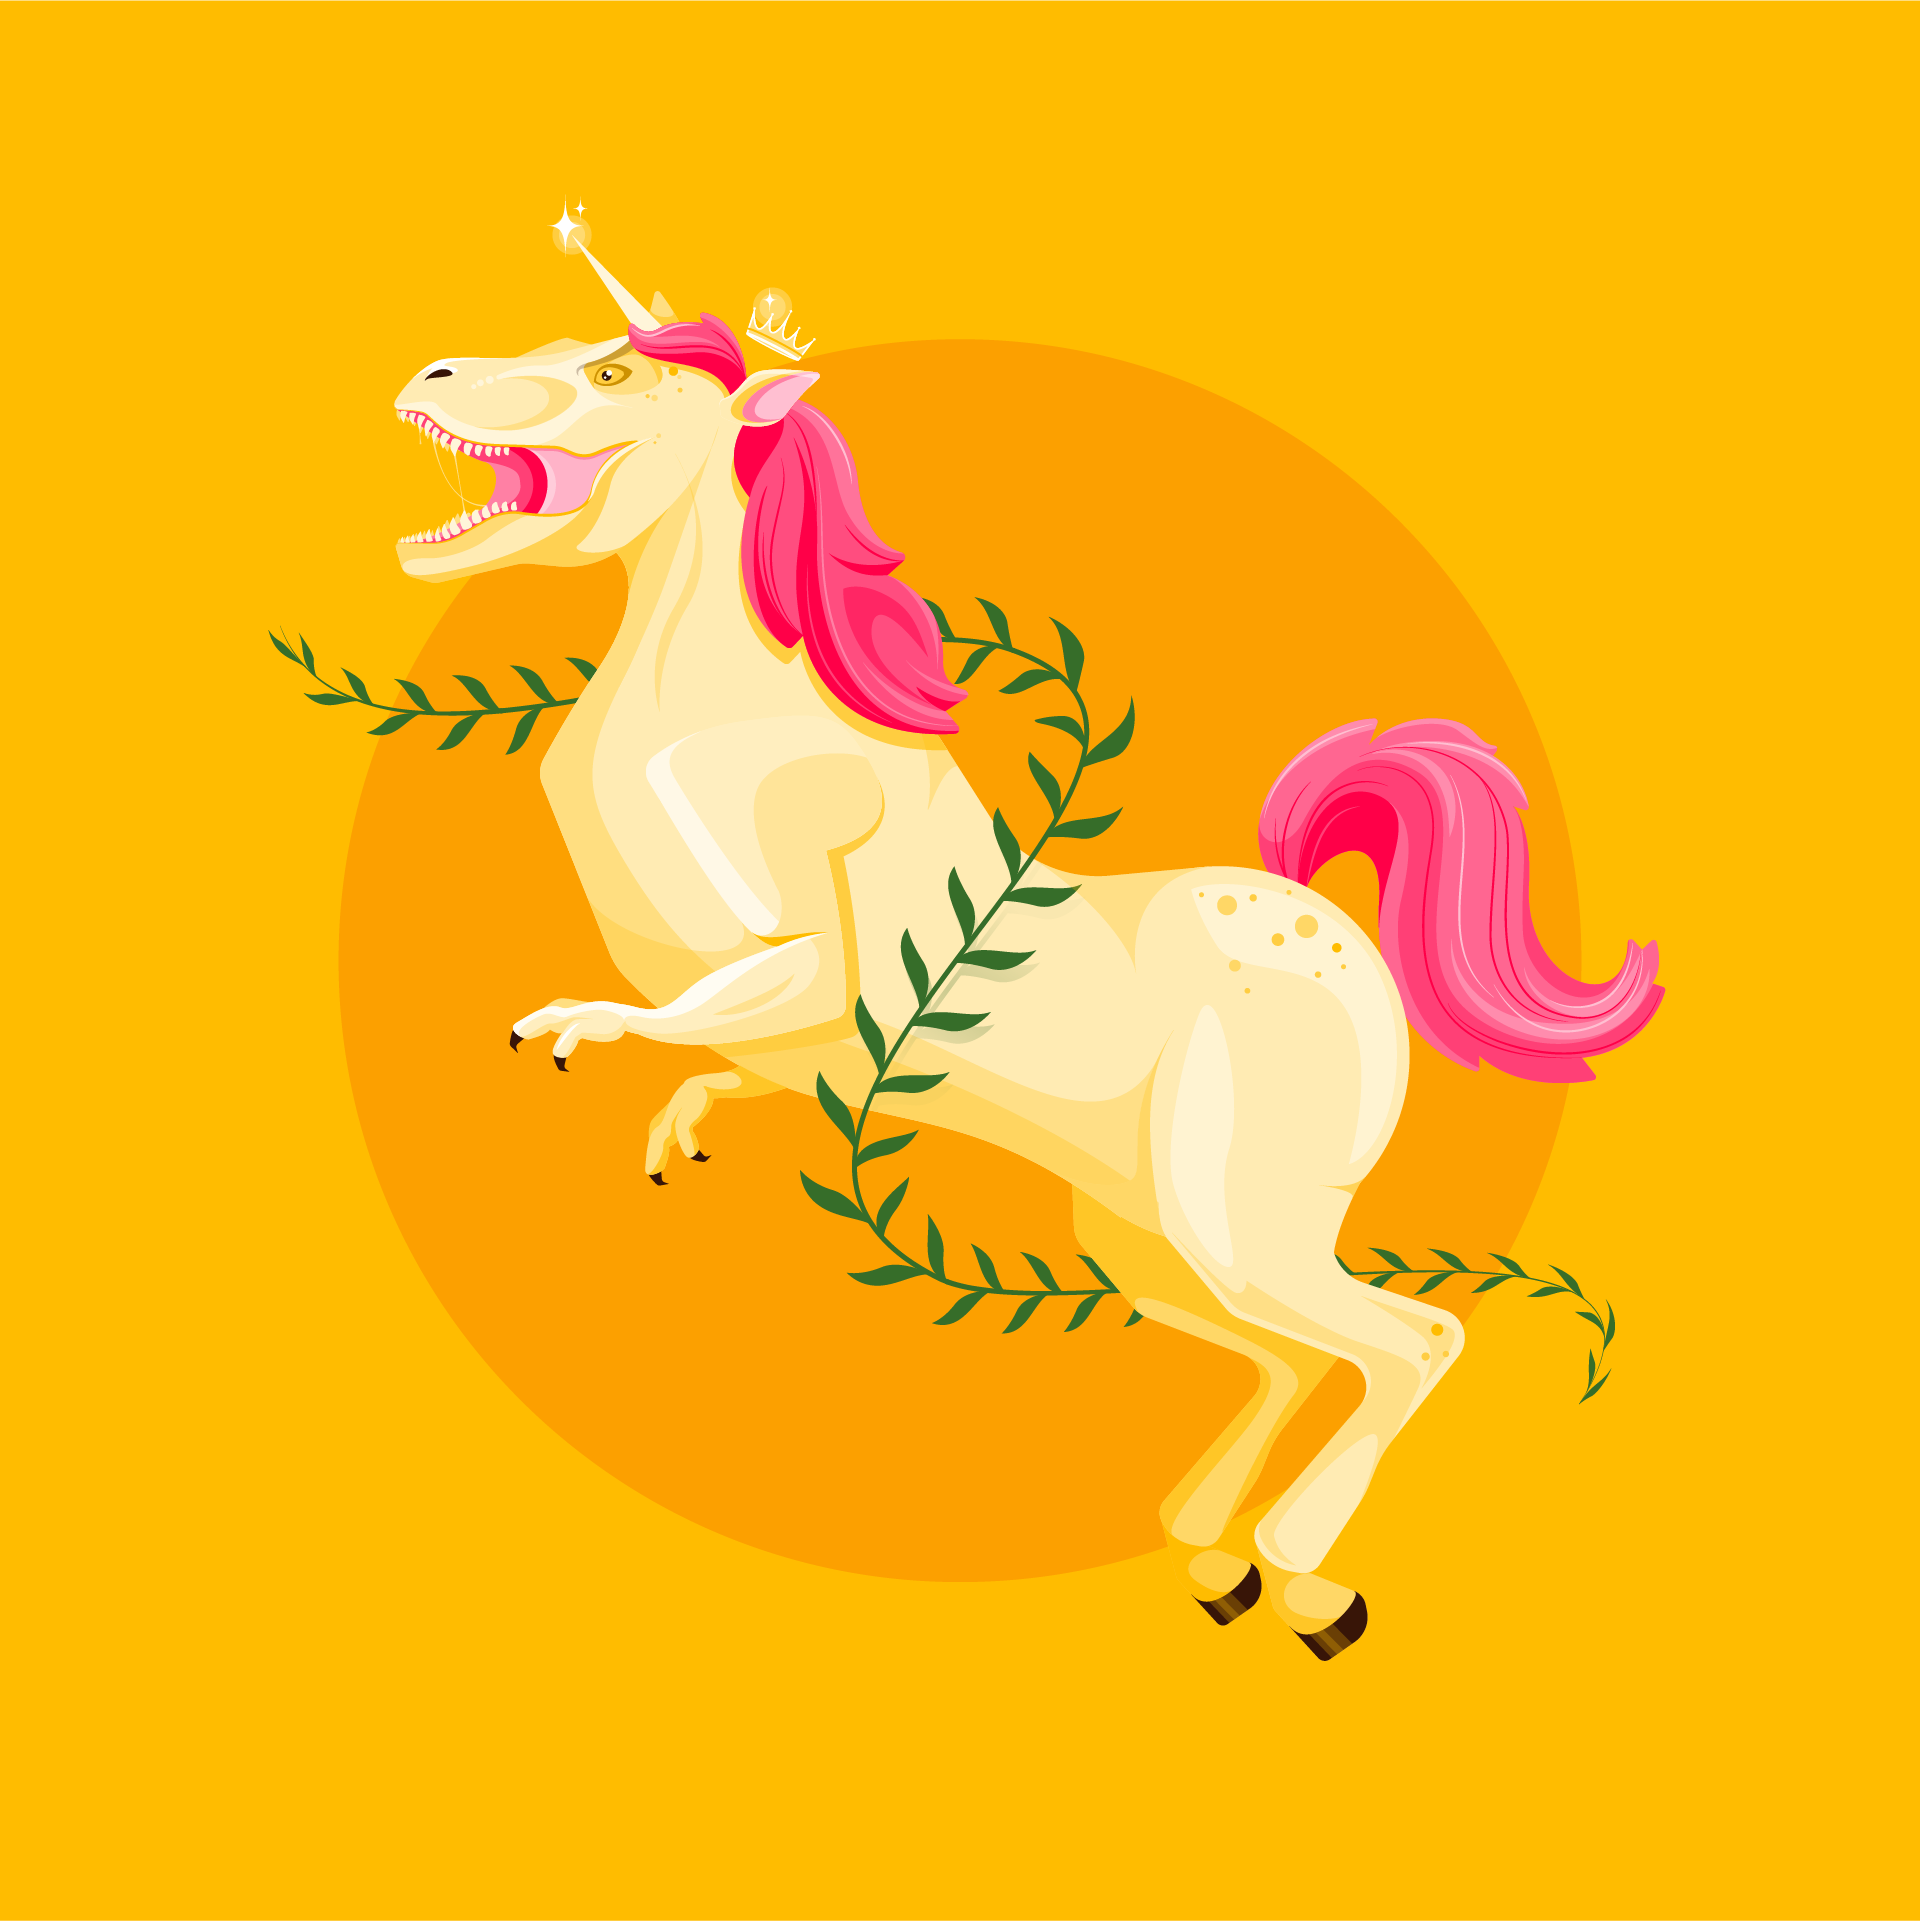 Illustration of a chimera unicorn/T-Rex with a tiny, dainty crown